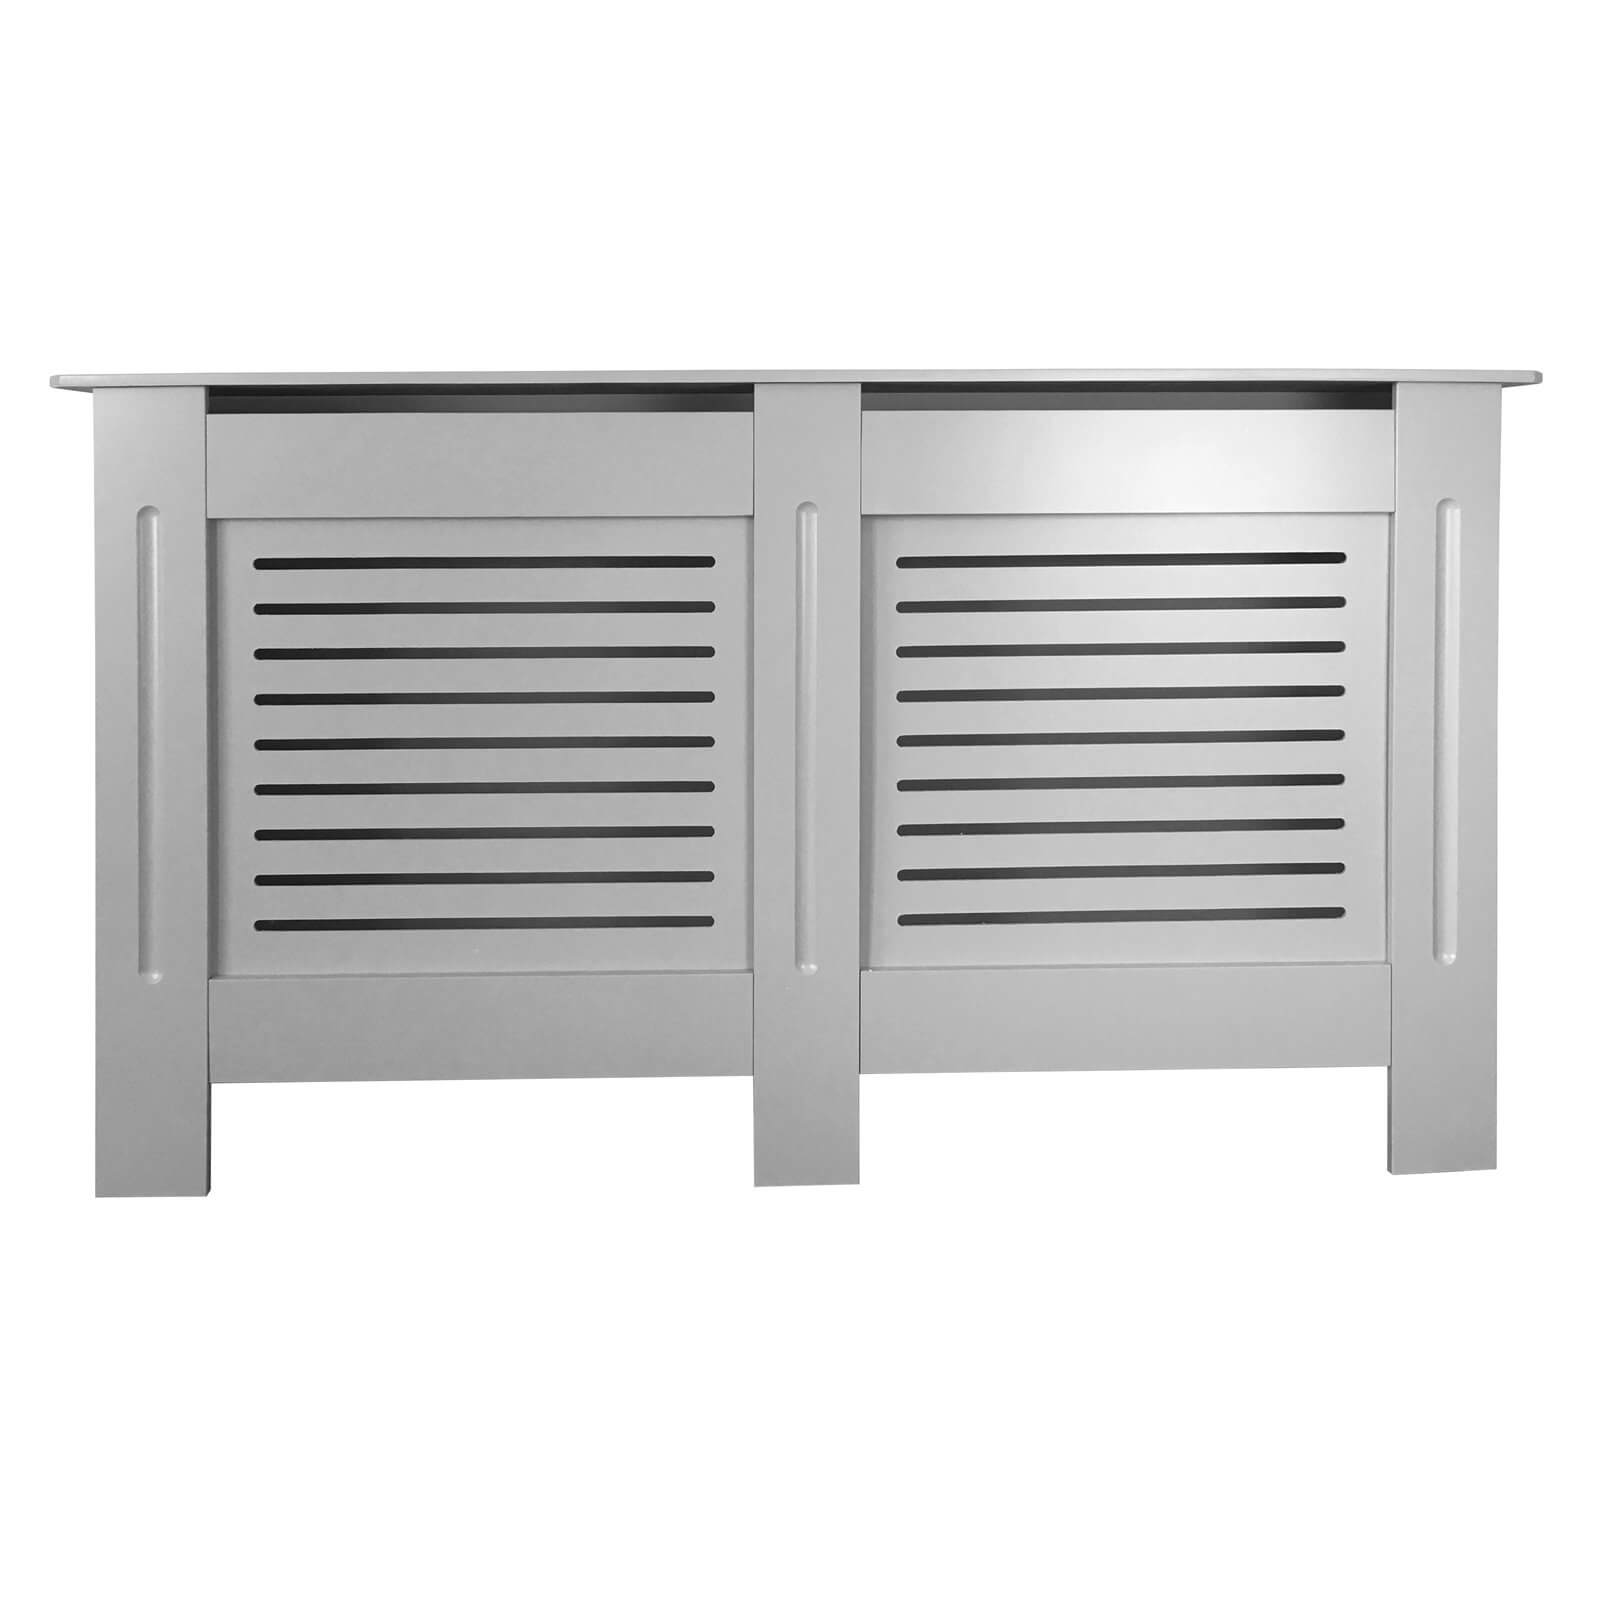 Radiator Cover with Horizontal Slatted Design in Grey - Large